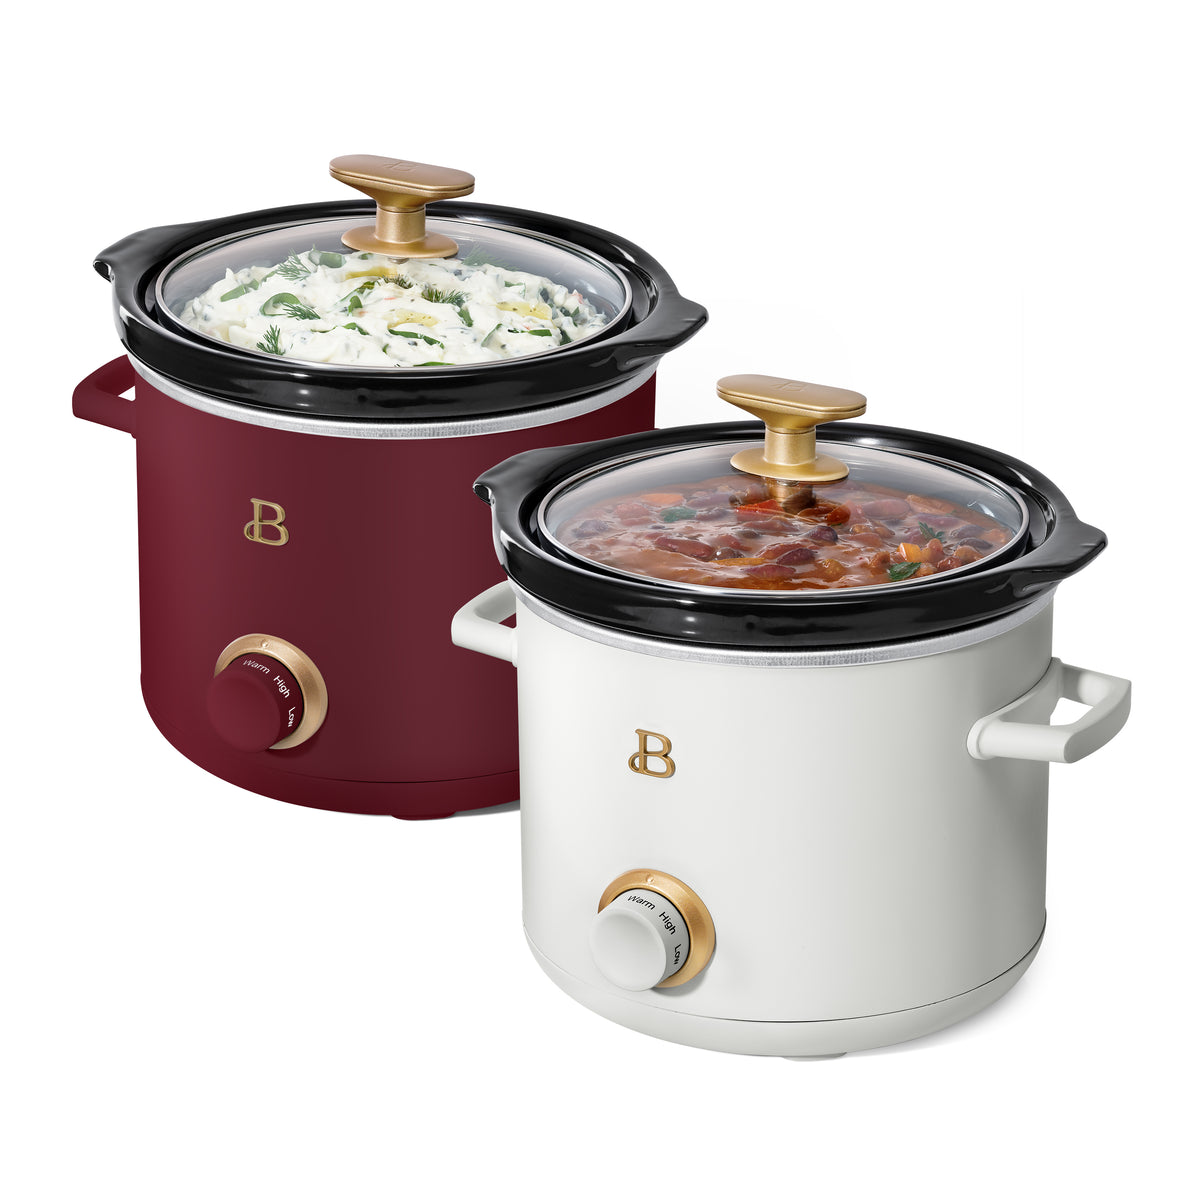 TRU Double Slow Cooker by Select Brands - Double Buffet Server for Parties,  Holidays & Gatherings - Double Slow Cooker Buffet Server - 2 Inserts, Each